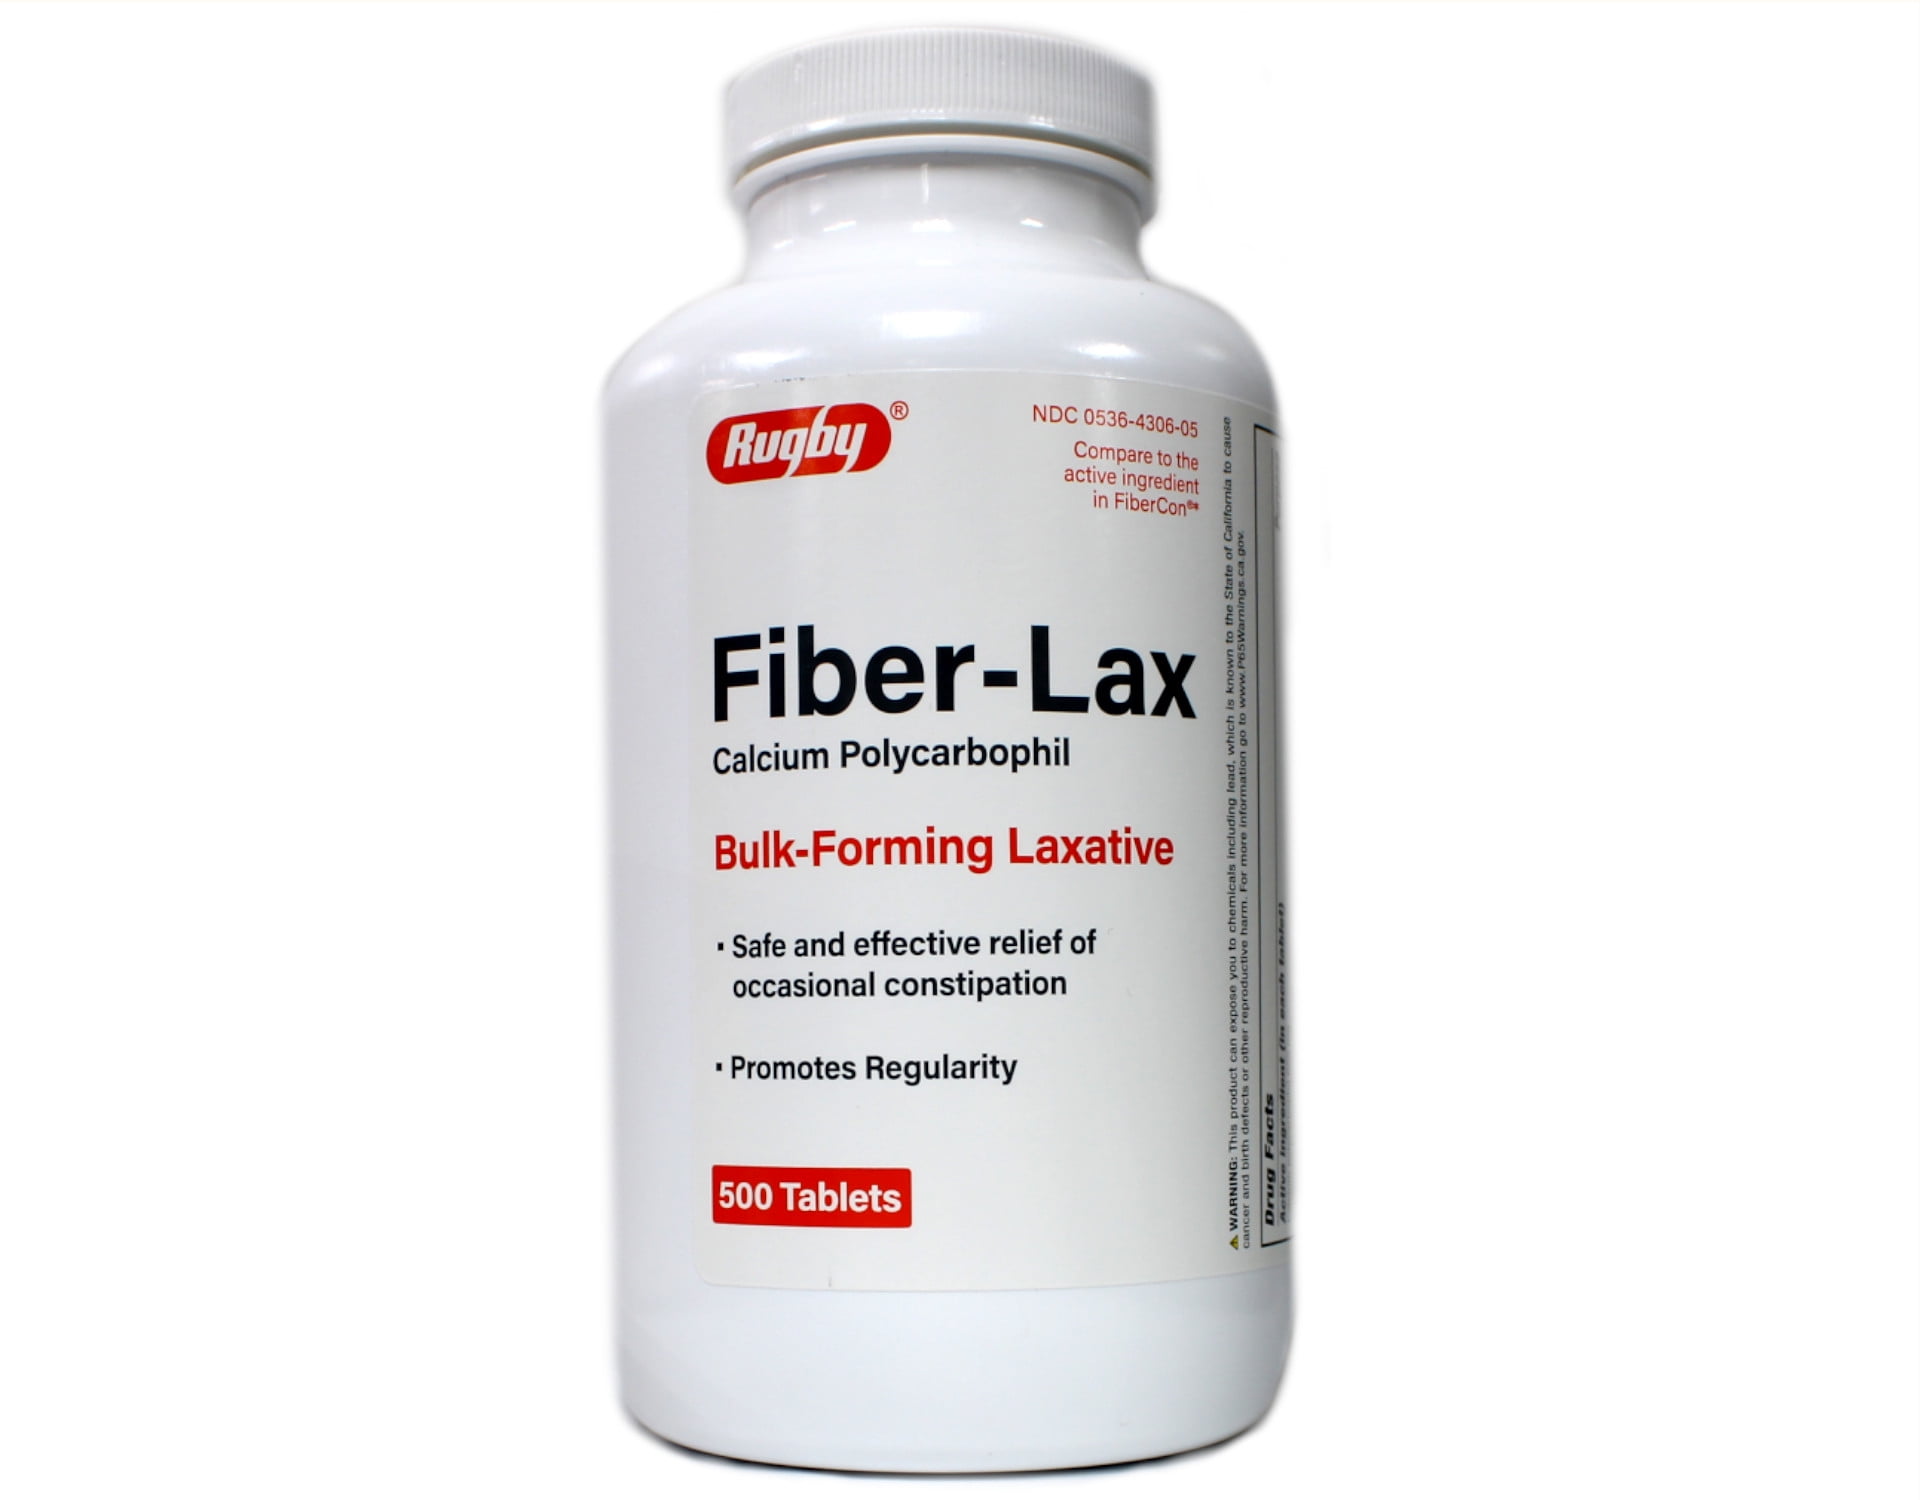 104 (Flexeril - What Are Names of Common Muscle Relaxers?) – Caca Labs